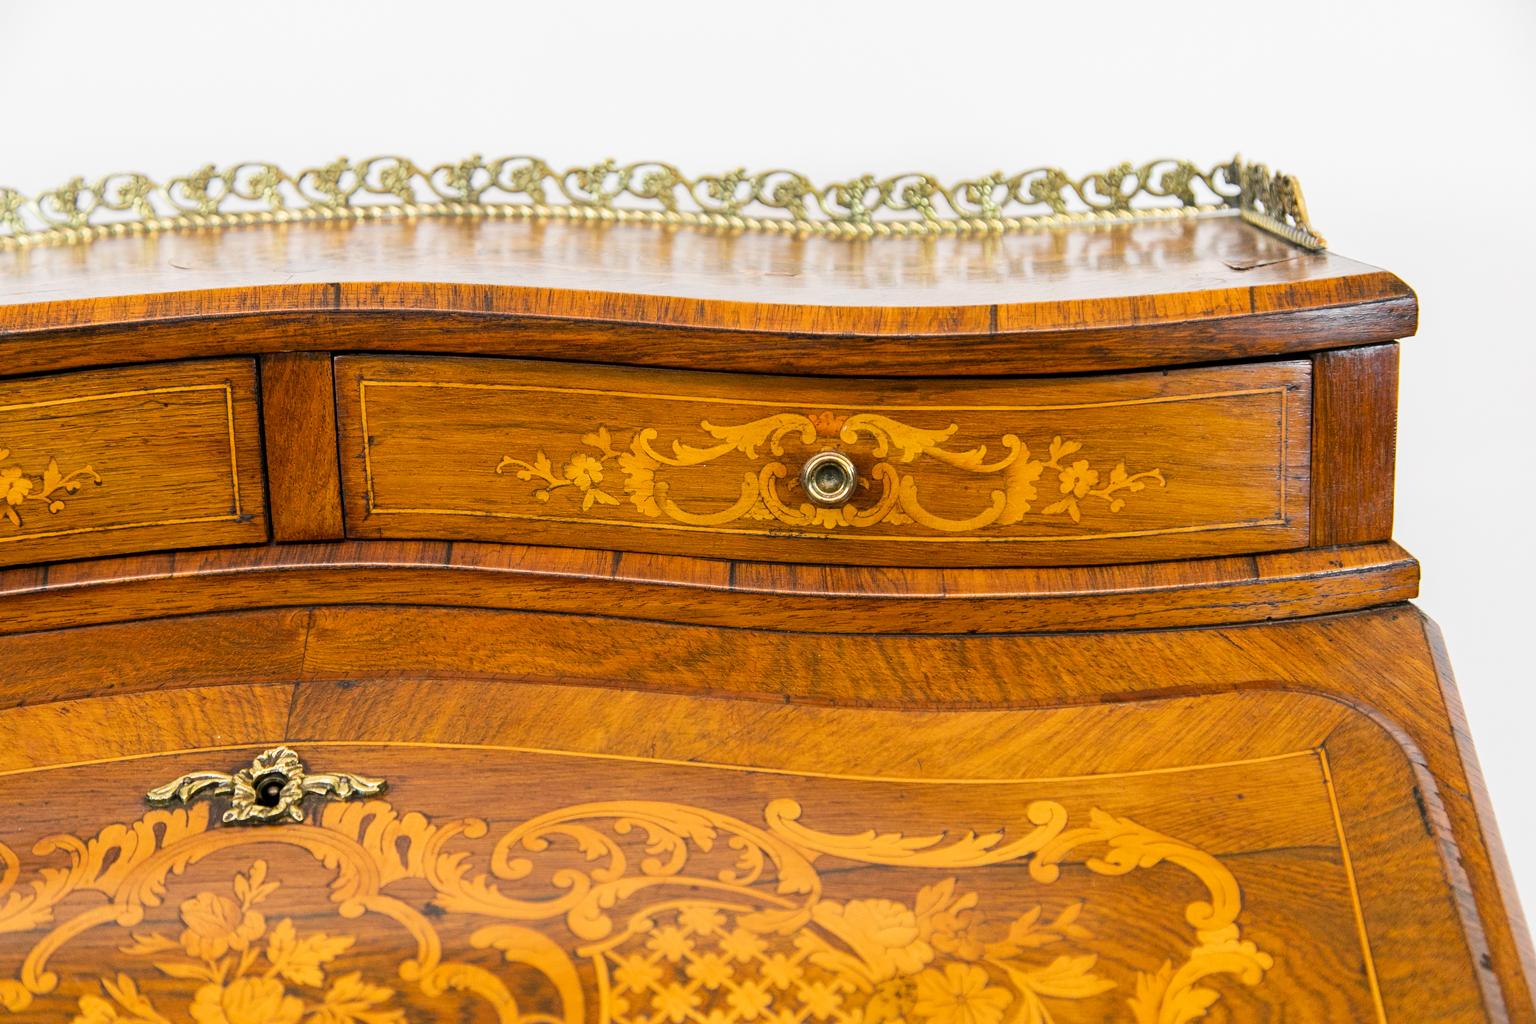 French inlaid ladies desk, with bombe shaped sides and have elaborate satinwood and boxwood inlays with floral and arabesque designs as well as inlaid diapered cartouches. The three sides have book matched rosewood cross banding. The interior has